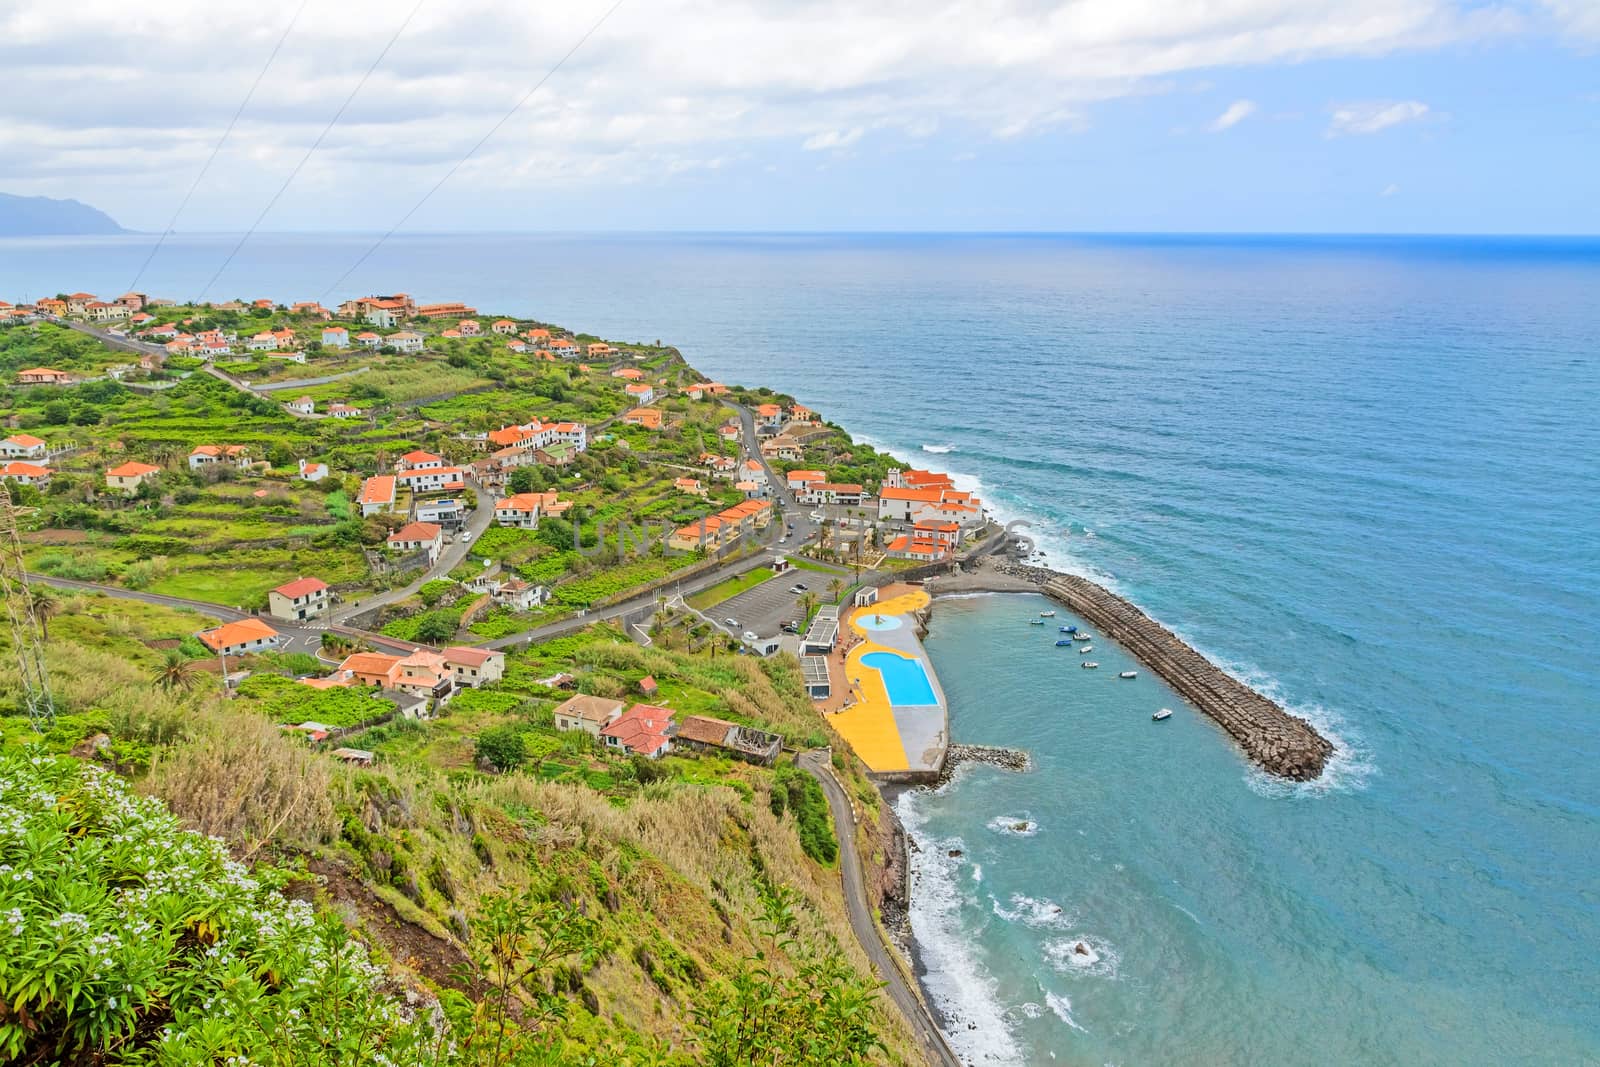 Ponta Delgada, Madeira - June 7, 2013: Eastern part of the village stretching into Atlantic Ocean - swimming bath in the foreground.